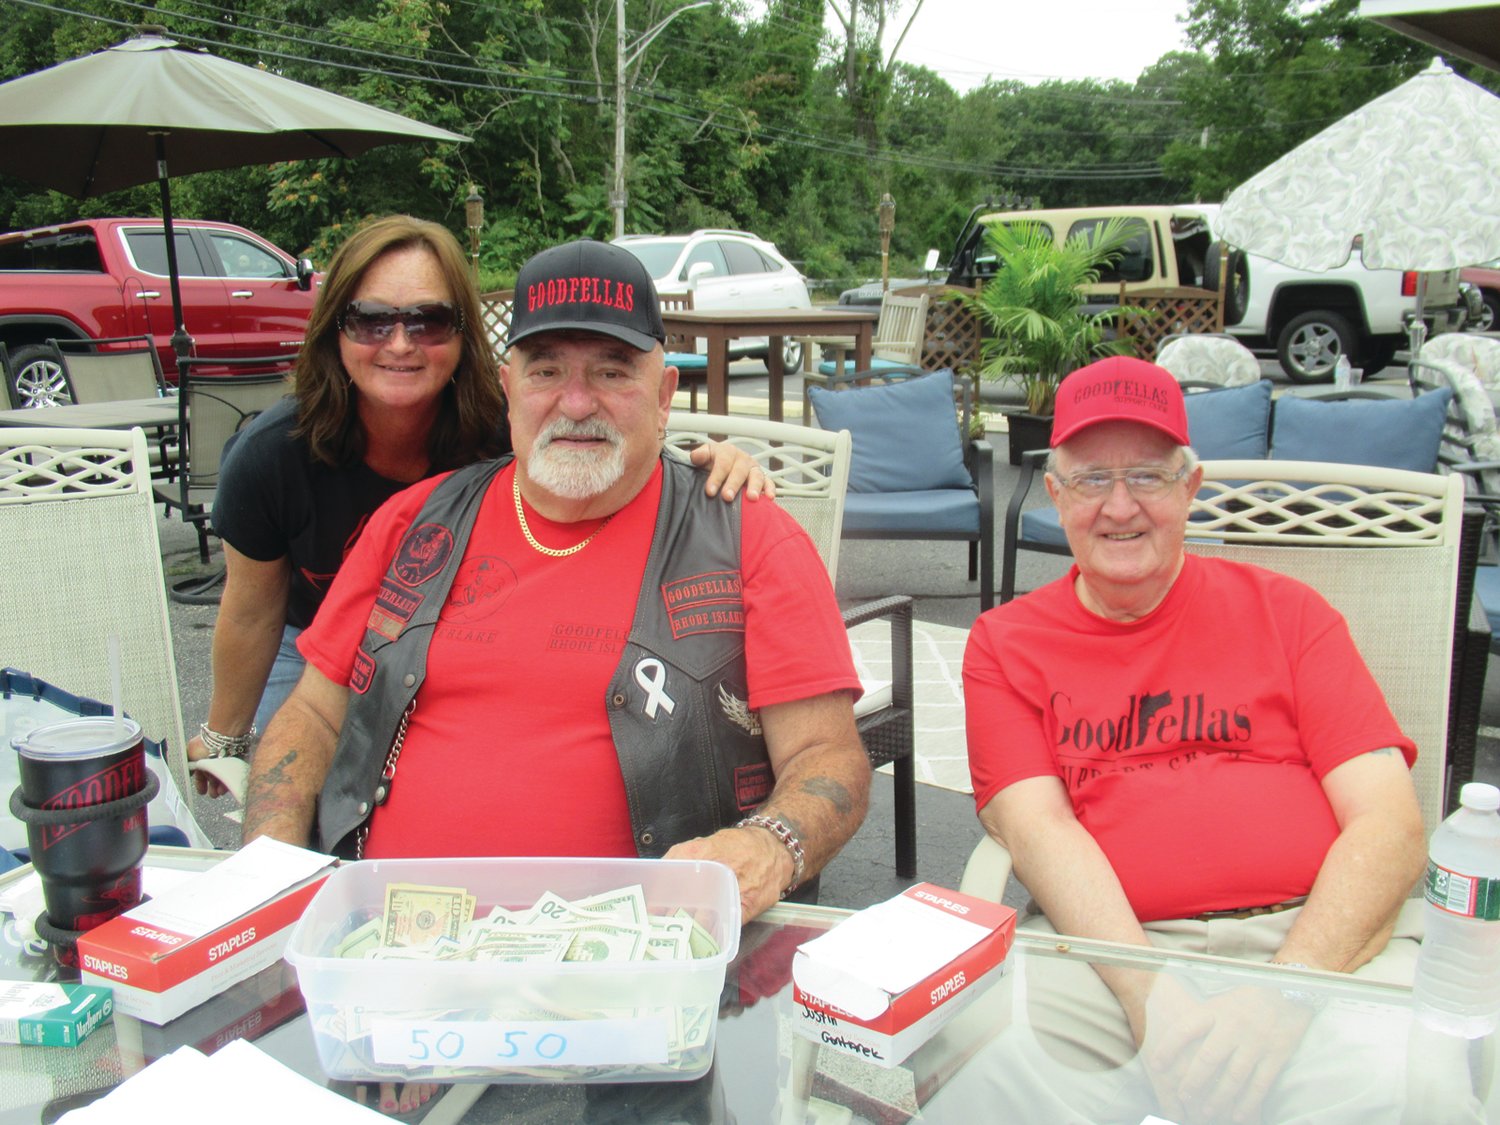 TERRIFIC TRIO: Bruno Ramieri (right) promised to match up to $20,000 for each dollar the Goodfellas Motorcycle Run took in, sits alongside Linda and Cal Calabro at the registration table helping out for Saturday’s 5th annual run.   